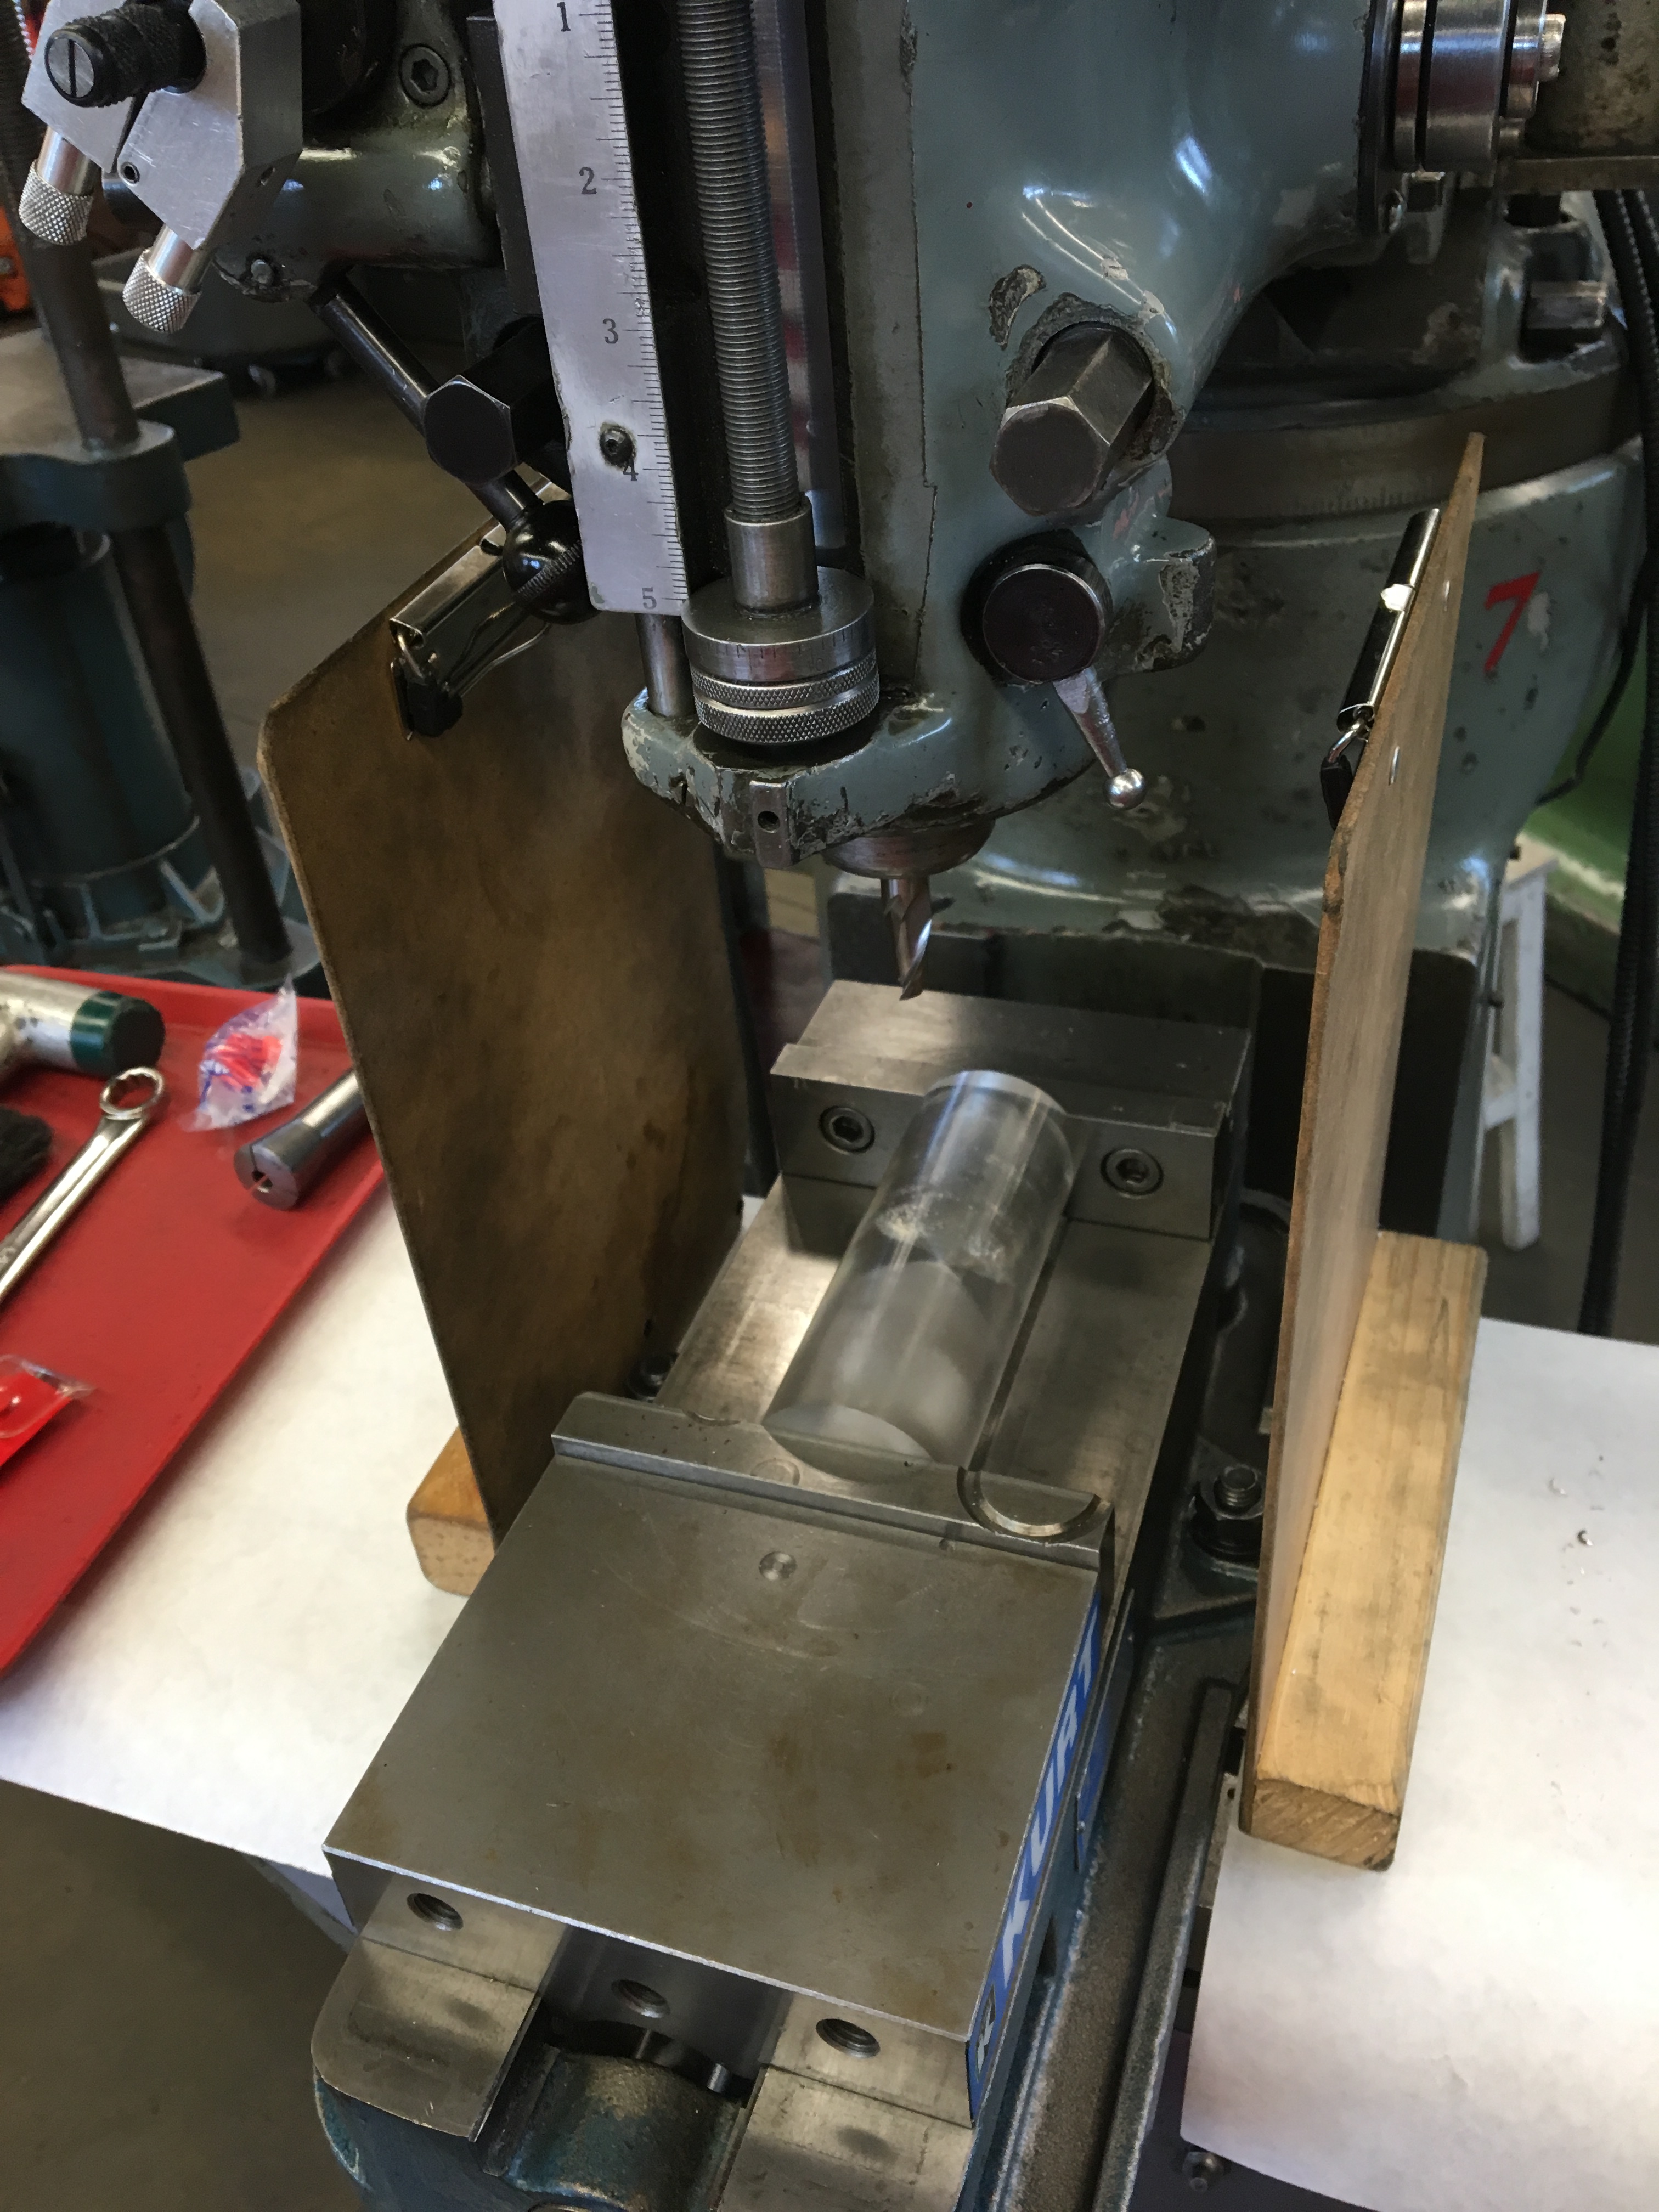 Setup for drilling inset slots in the hourglass